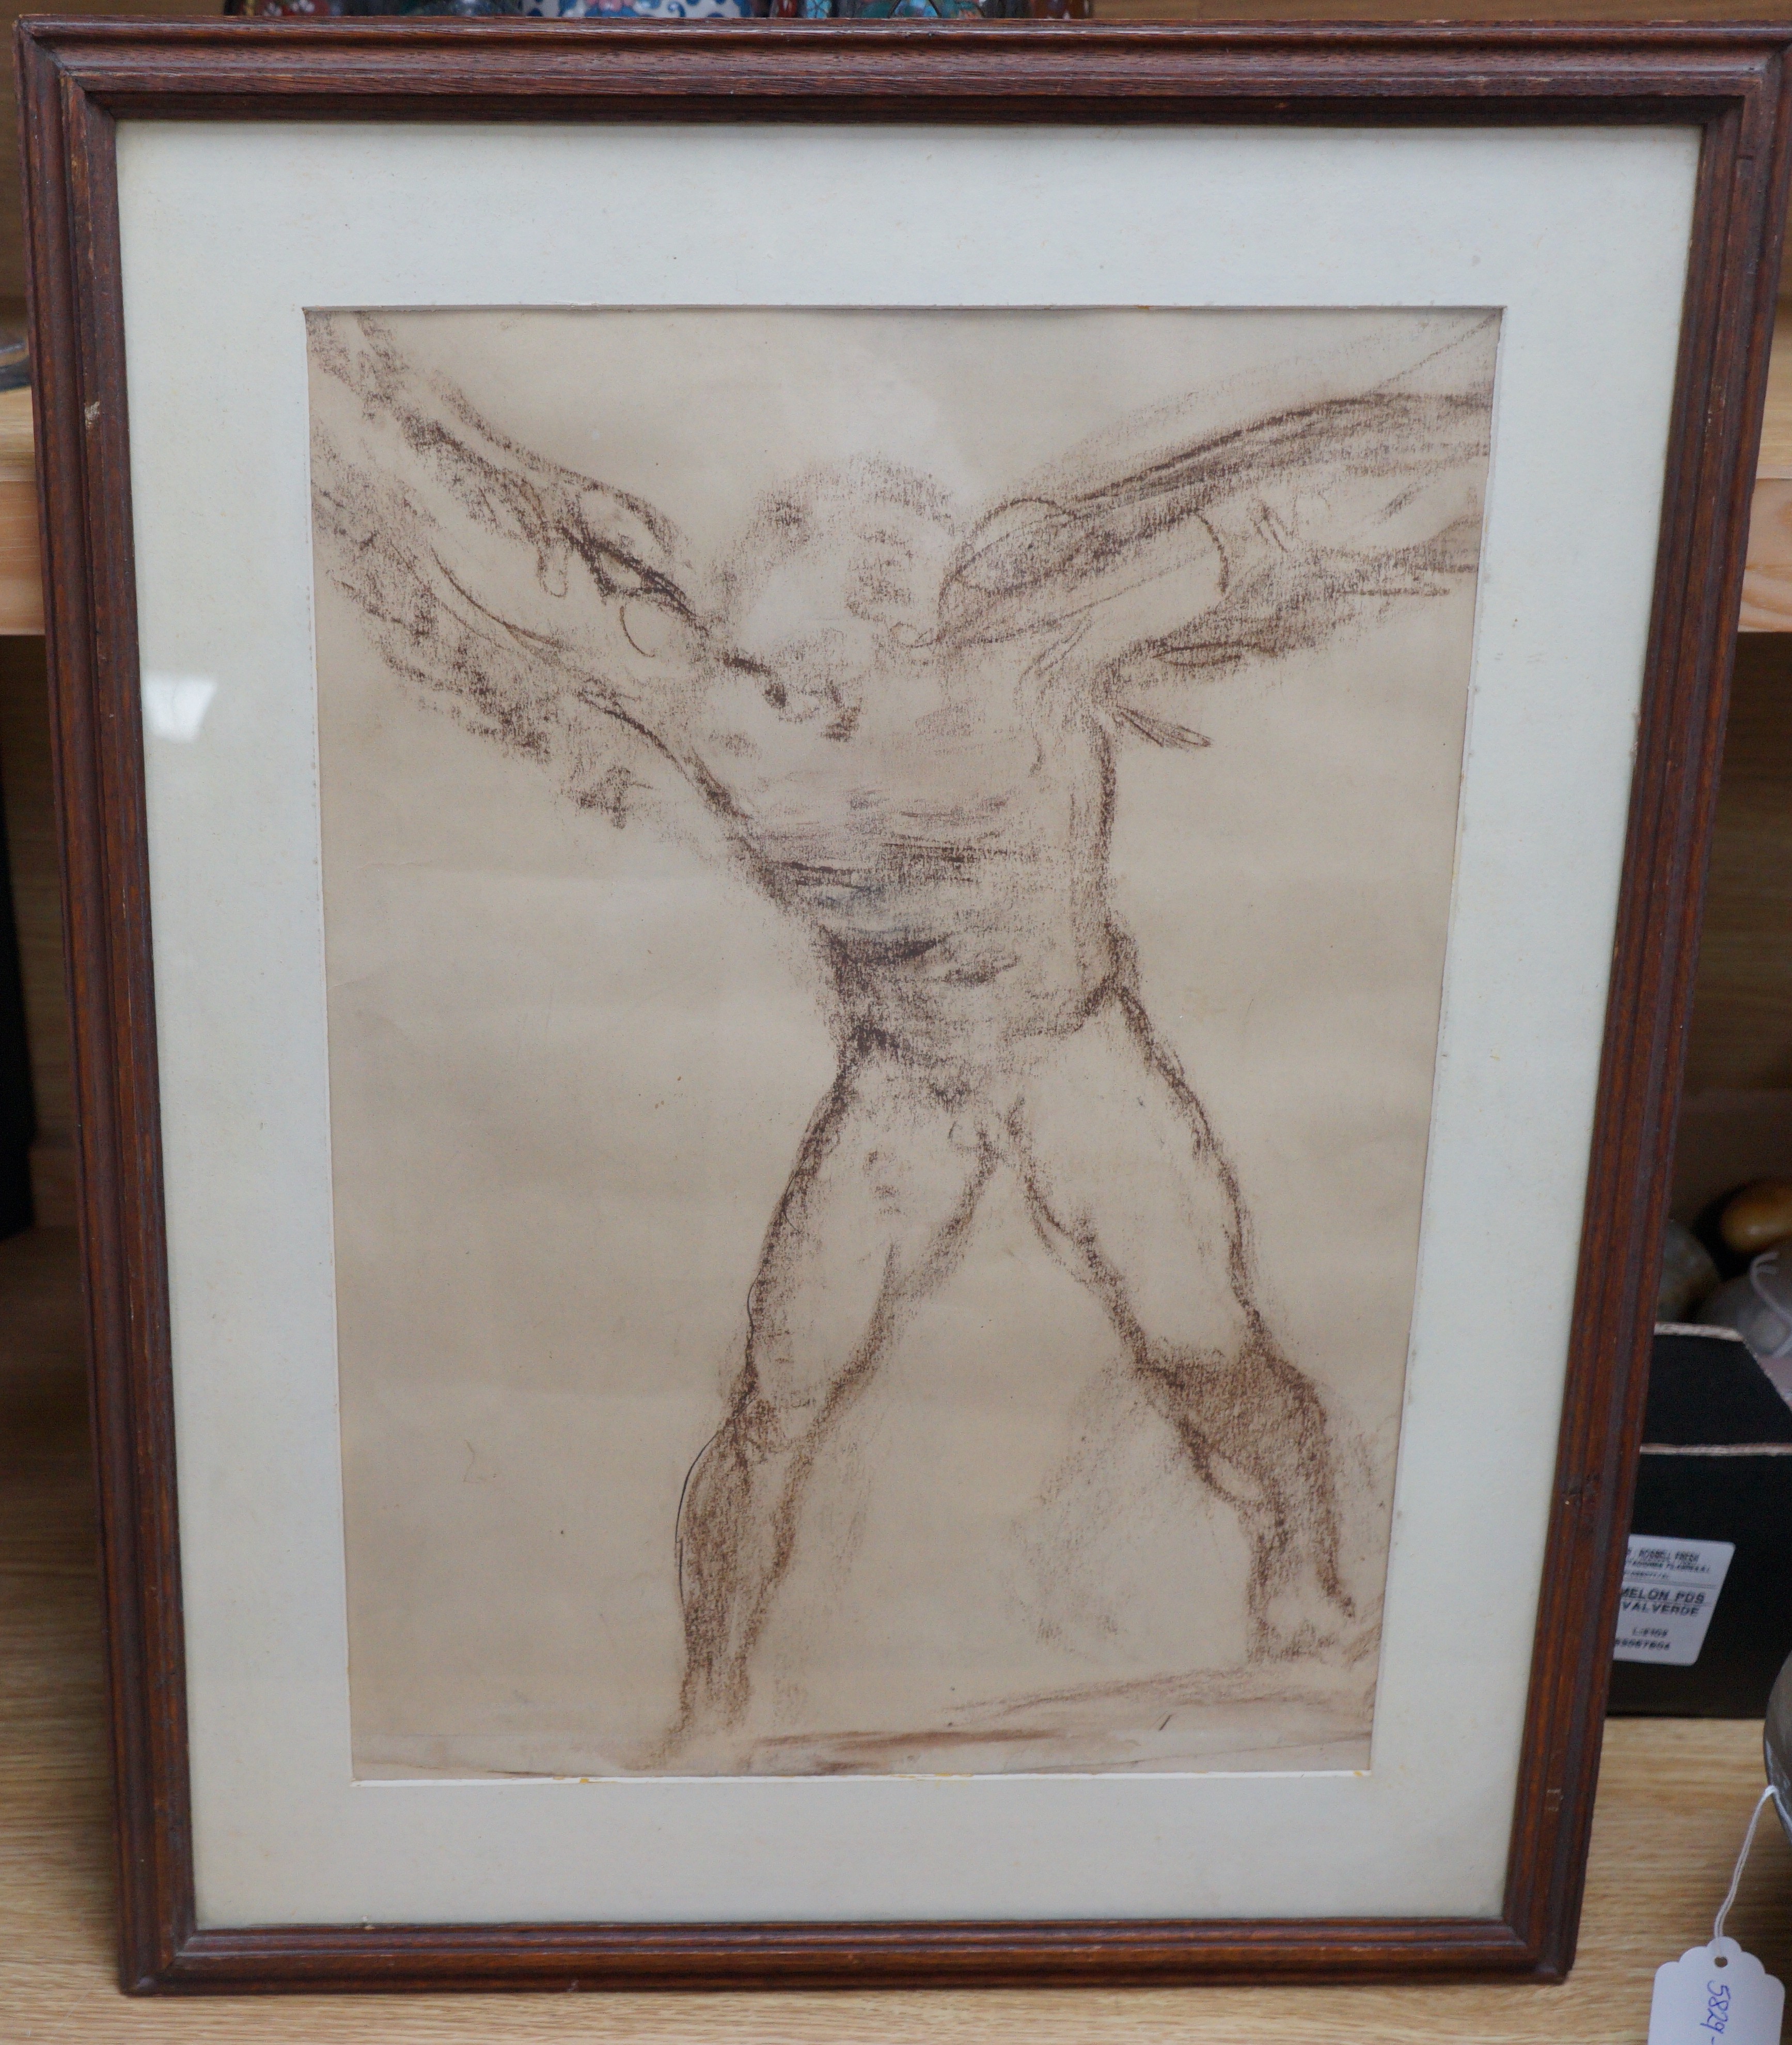 Modern British, brown chalk on paper, Study of a winged figure, 44 x 32cm